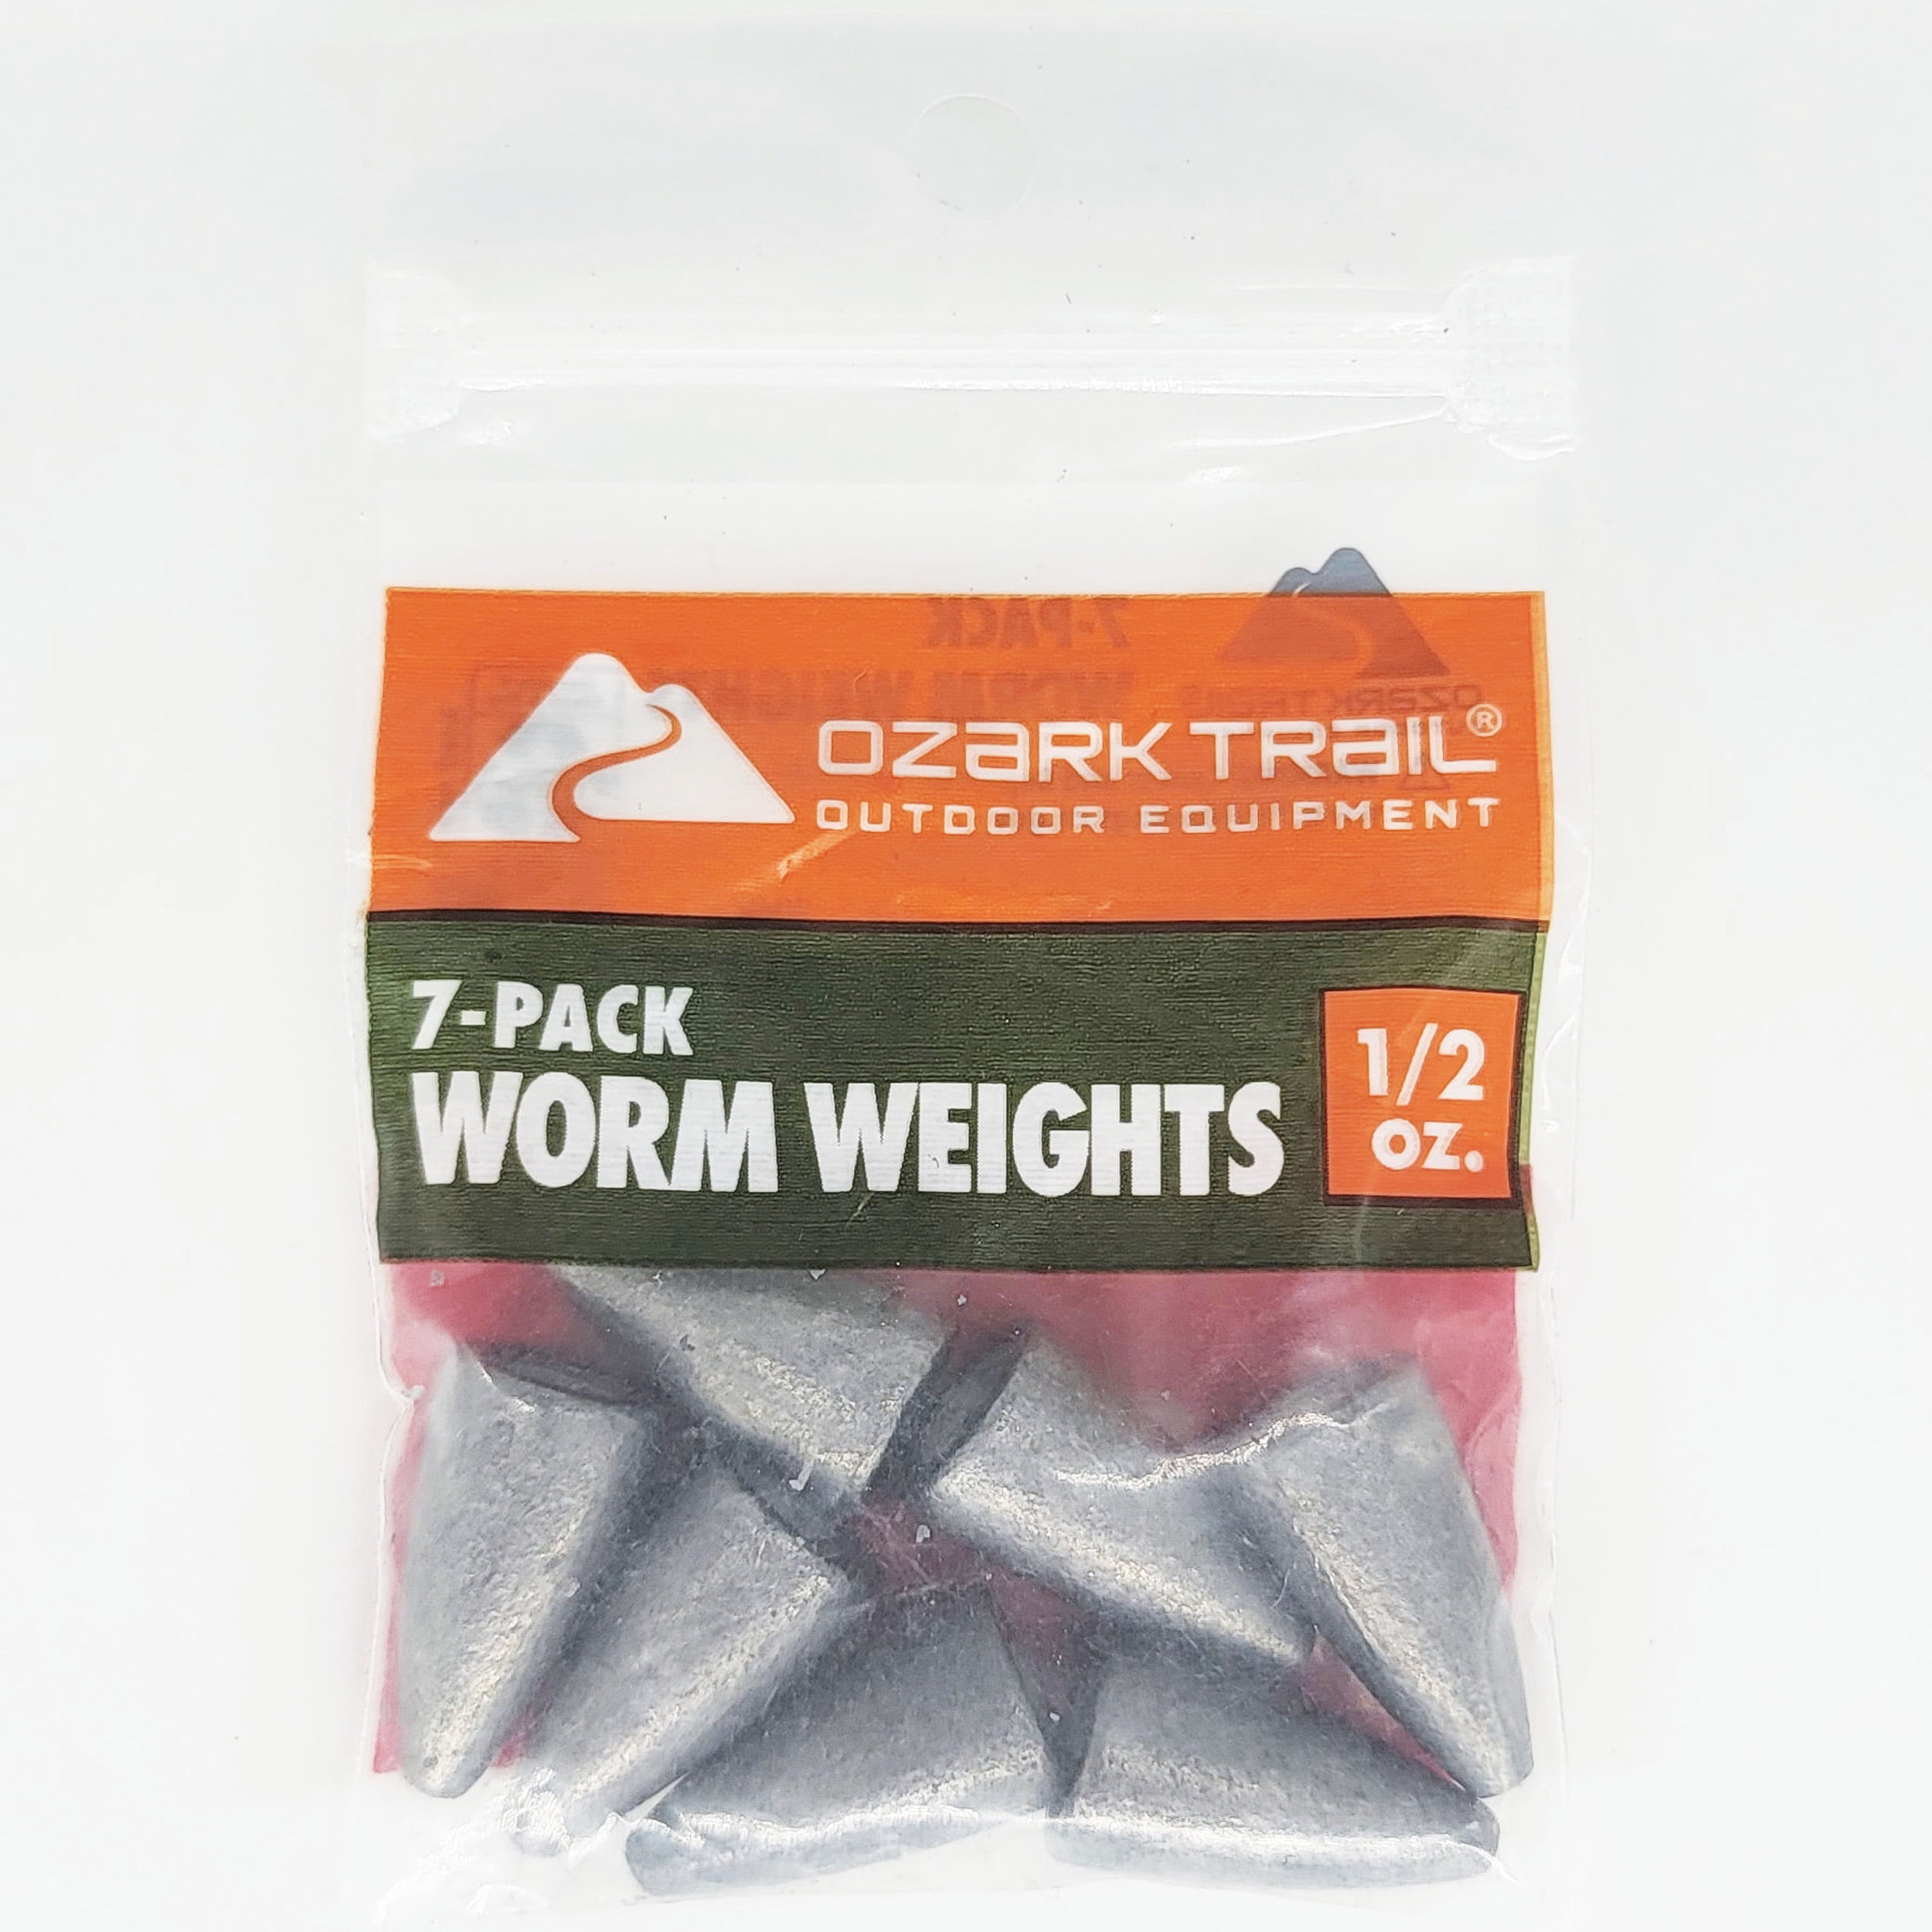 Ozark Trail Worm Weight 1/2 oz, Fishing Lead Weight, Product Size